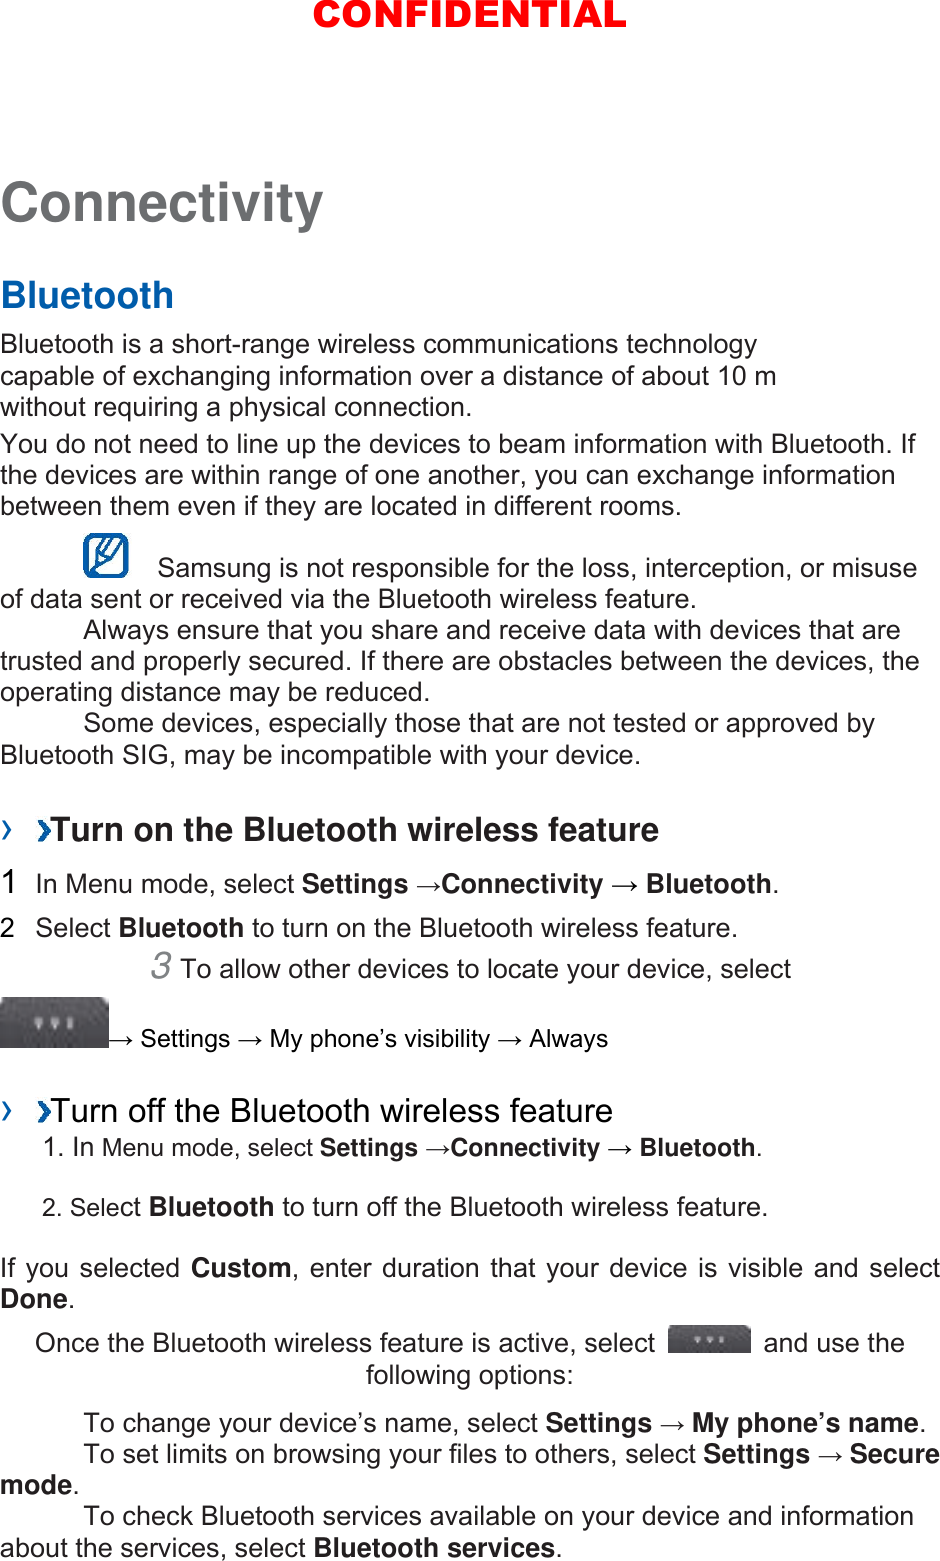 Connectivity   Bluetooth   Bluetooth is a short-range wireless communications technology capable of exchanging information over a distance of about 10 m without requiring a physical connection.   You do not need to line up the devices to beam information with Bluetooth. If the devices are within range of one another, you can exchange information between them even if they are located in different rooms.      Samsung is not responsible for the loss, interception, or misuse of data sent or received via the Bluetooth wireless feature.     Always ensure that you share and receive data with devices that are trusted and properly secured. If there are obstacles between the devices, the operating distance may be reduced.     Some devices, especially those that are not tested or approved by Bluetooth SIG, may be incompatible with your device.    ›  Turn on the Bluetooth wireless feature   1  In Menu mode, select Settings →Connectivity → Bluetooth.  2  Select Bluetooth to turn on the Bluetooth wireless feature.   3 To allow other devices to locate your device, select   → Settings → My phone’s visibility → Always    ›  Turn off the Bluetooth wireless feature   1. In Menu mode, select Settings →Connectivity → Bluetooth. 2. Select Bluetooth to turn off the Bluetooth wireless feature. If you selected Custom, enter duration that your device is visible and select Done.  Once the Bluetooth wireless feature is active, select    and use the following options:     To change your device’s name, select Settings → My phone’s name.    To set limits on browsing your files to others, select Settings → Secure mode.    To check Bluetooth services available on your device and information about the services, select Bluetooth services.   CONFIDENTIAL